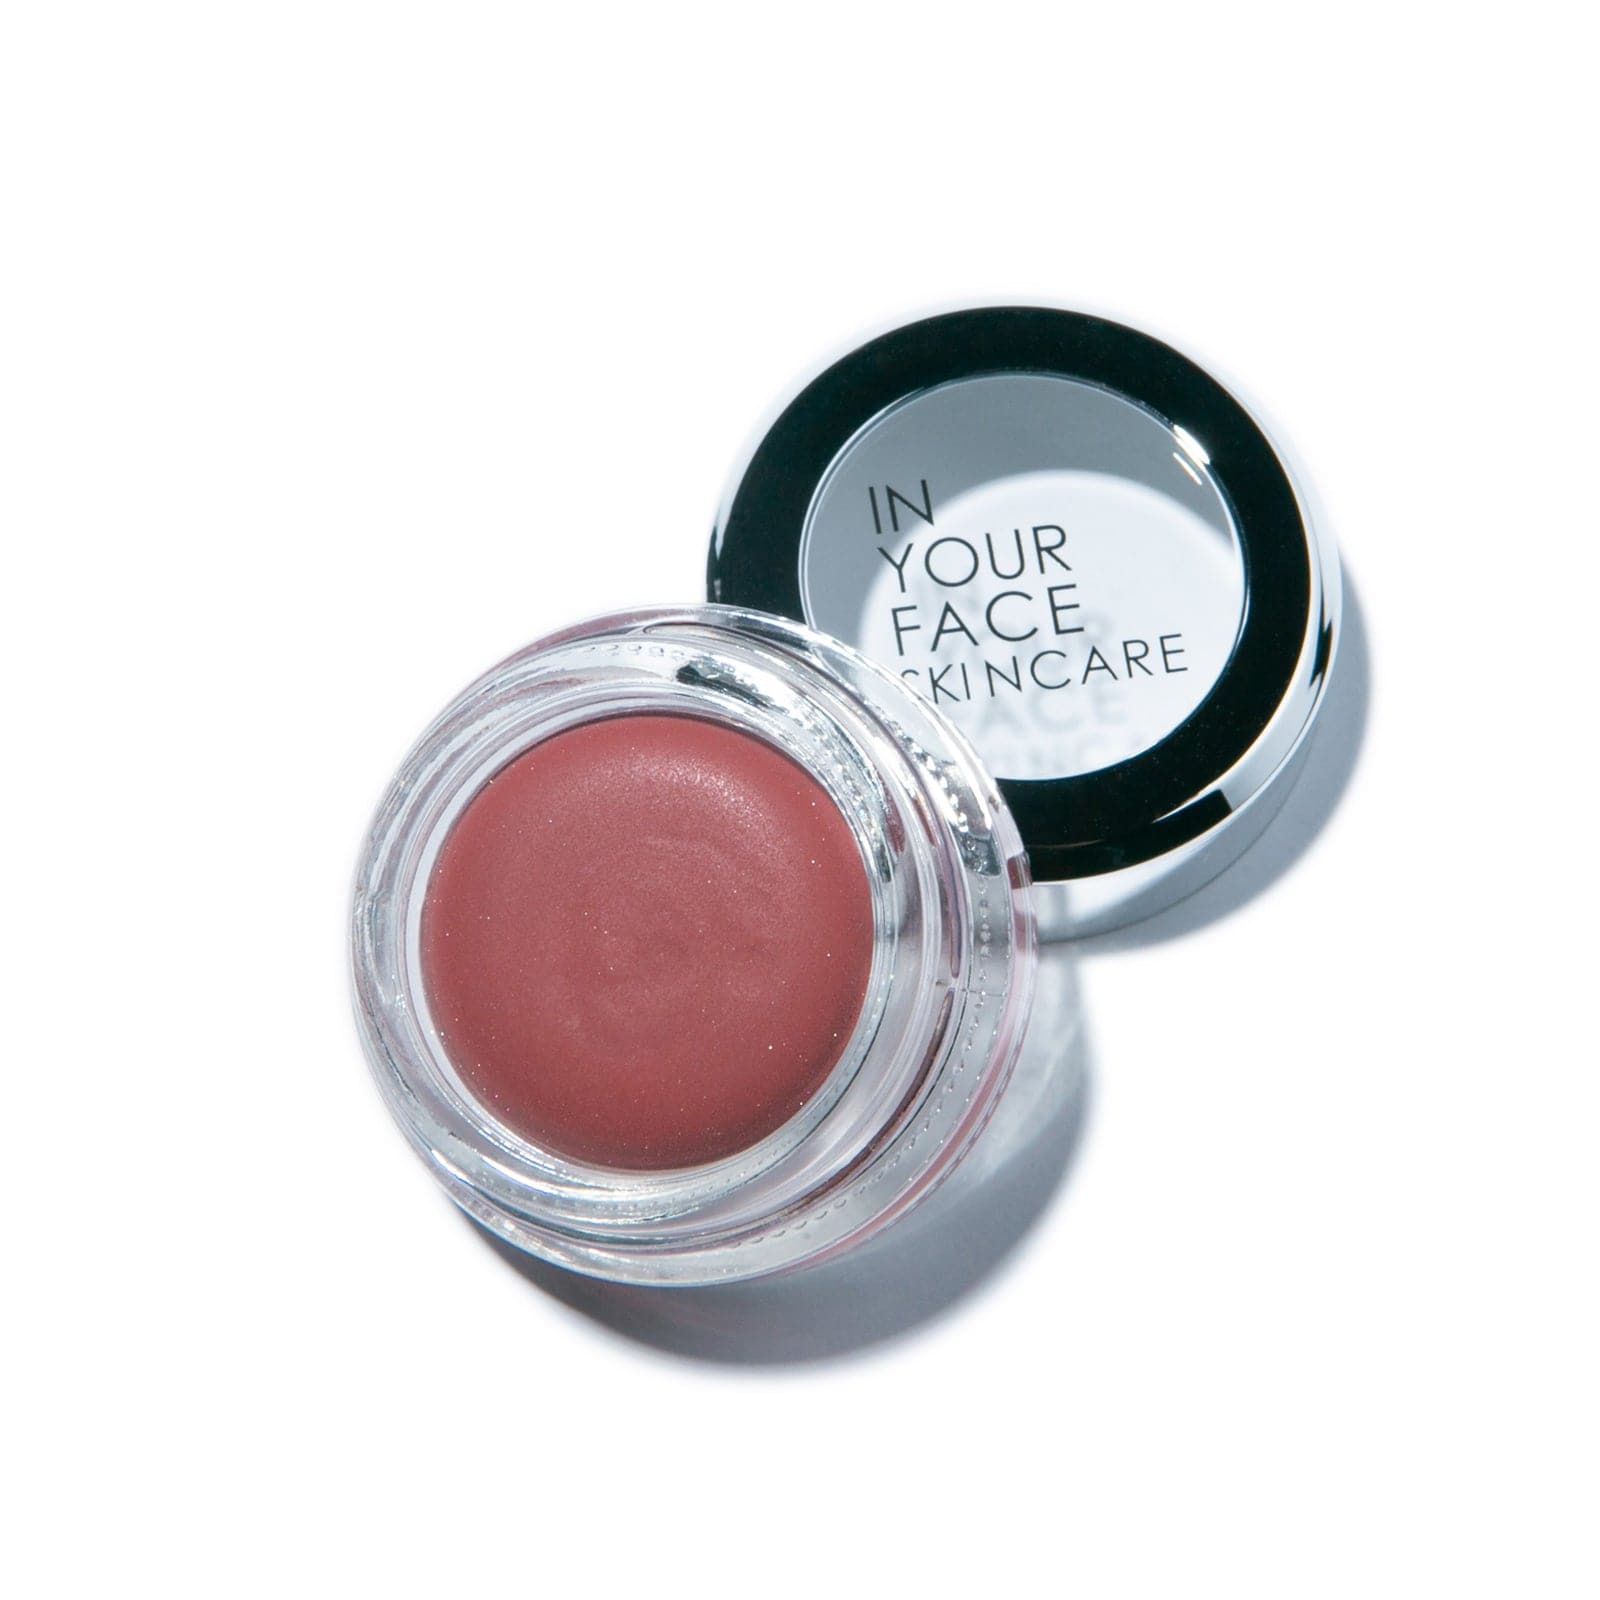 a pot of the IN YOUR FACE SKINCARE COLOR, showing it to be a deep rose in tone. It's in a glass jar.